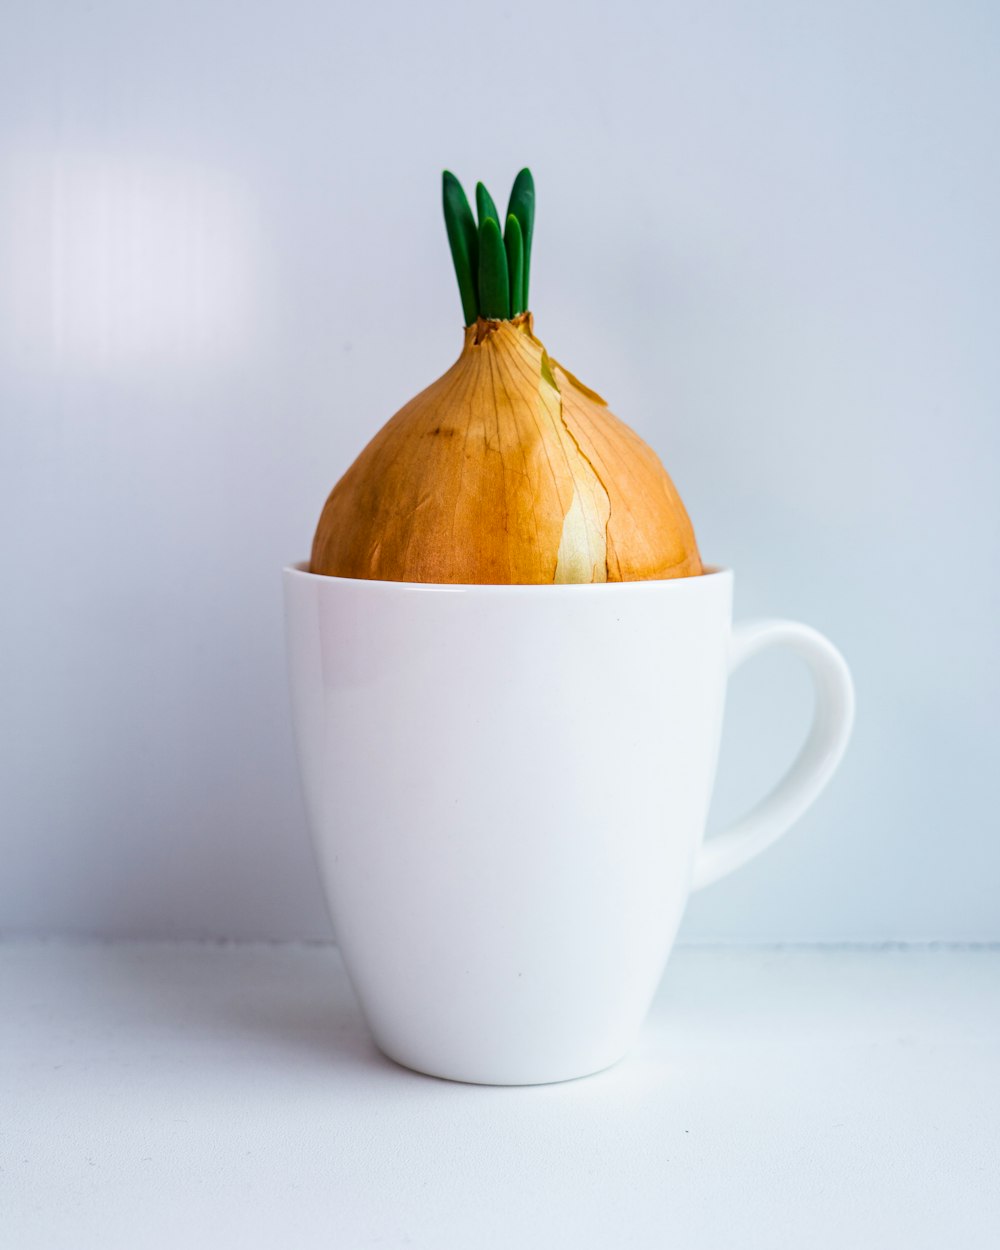 an onion sitting in a white cup on a table